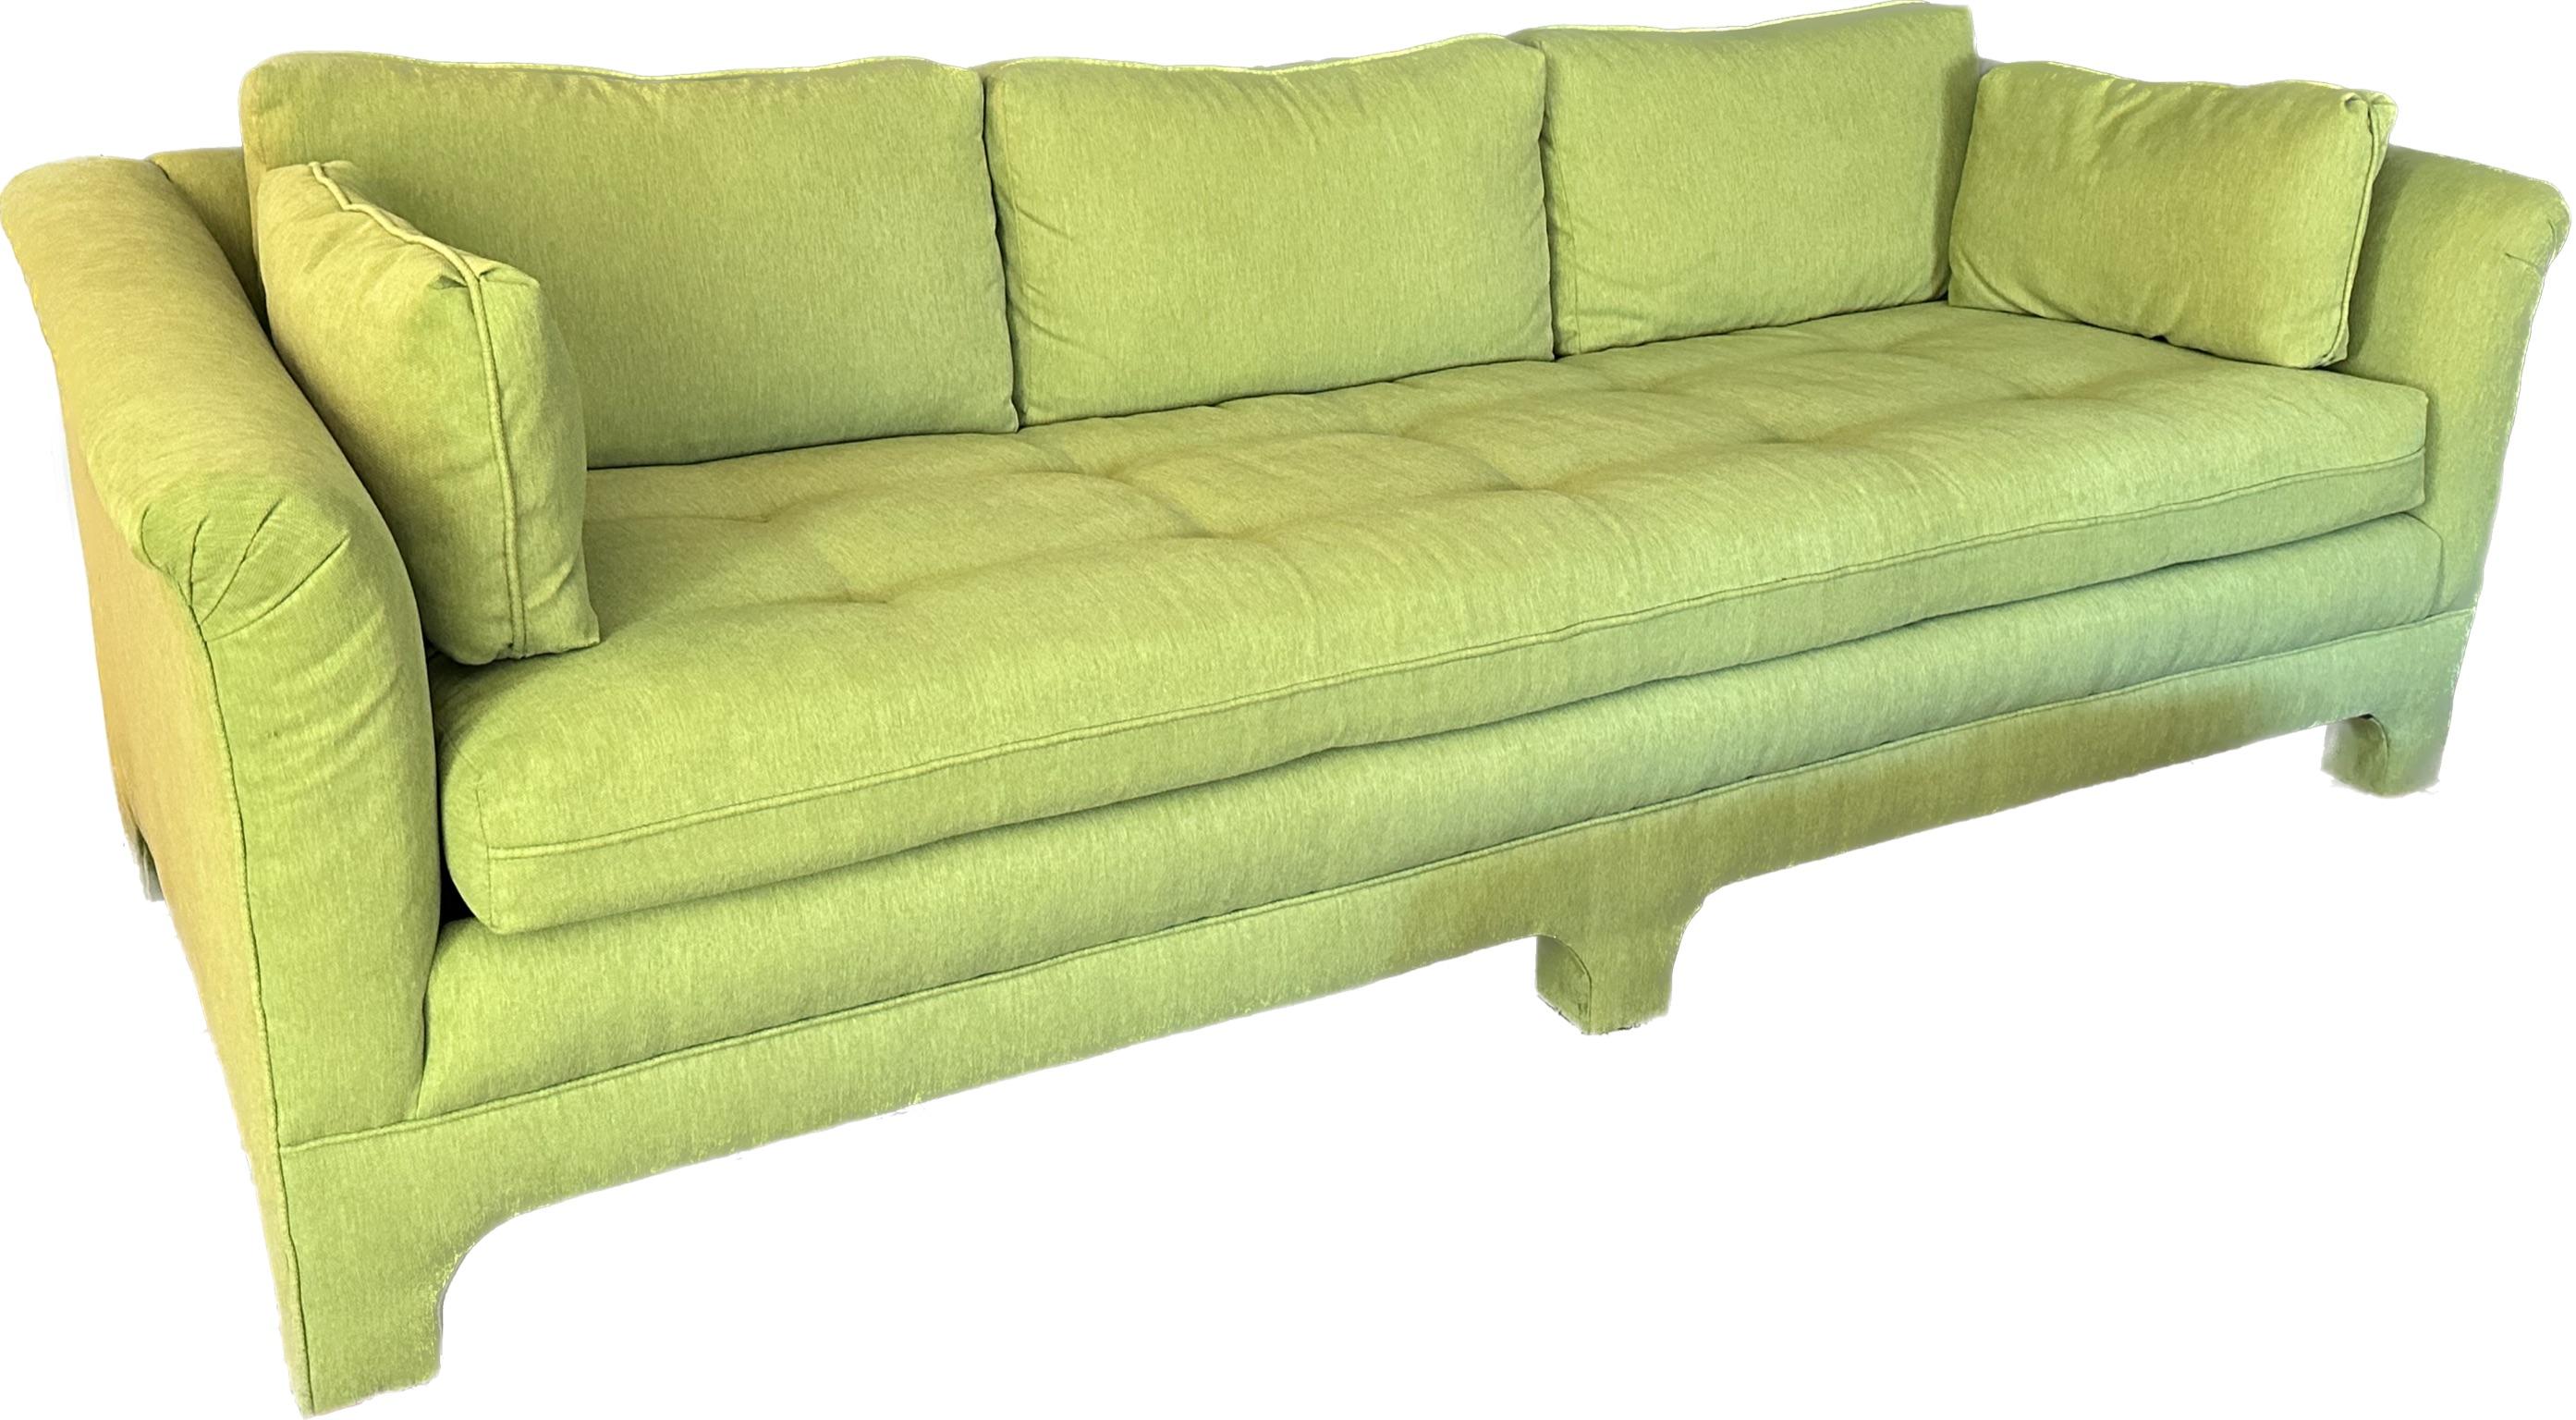 Vintage 70s parsons style sofa with a chinoiserie feel. Has great modern lines and tufted bench seat with five coordinating pillows with zippers and rolled arms. Solid vintage frame with newly upholstered in chartreuse green Crypton fabric. In